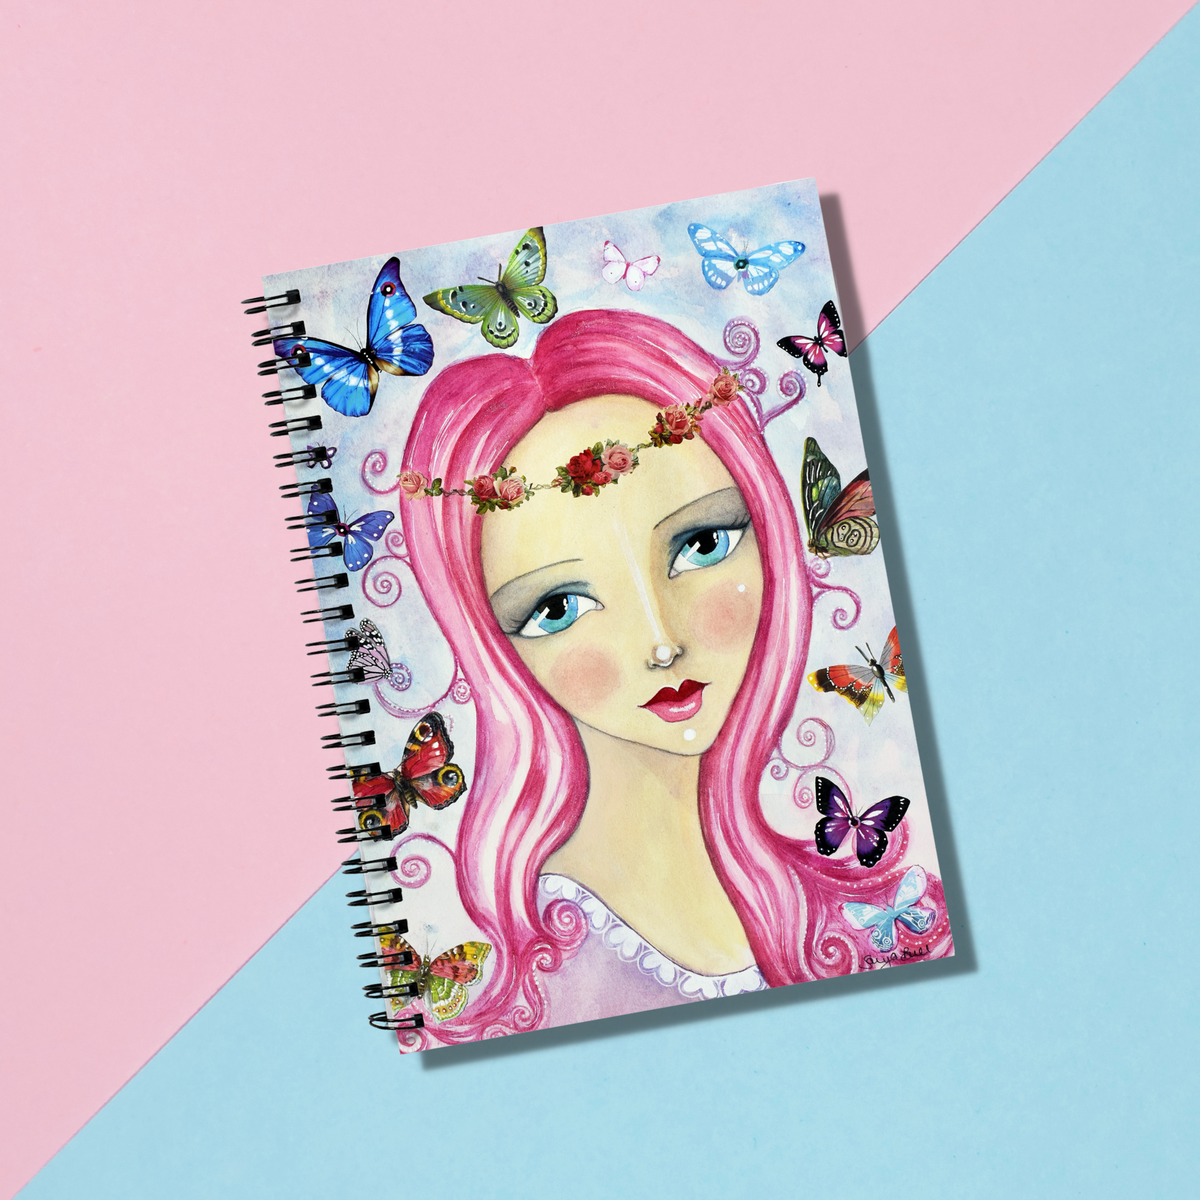 Notebook Collection featuring the artwork by Sonya Bull